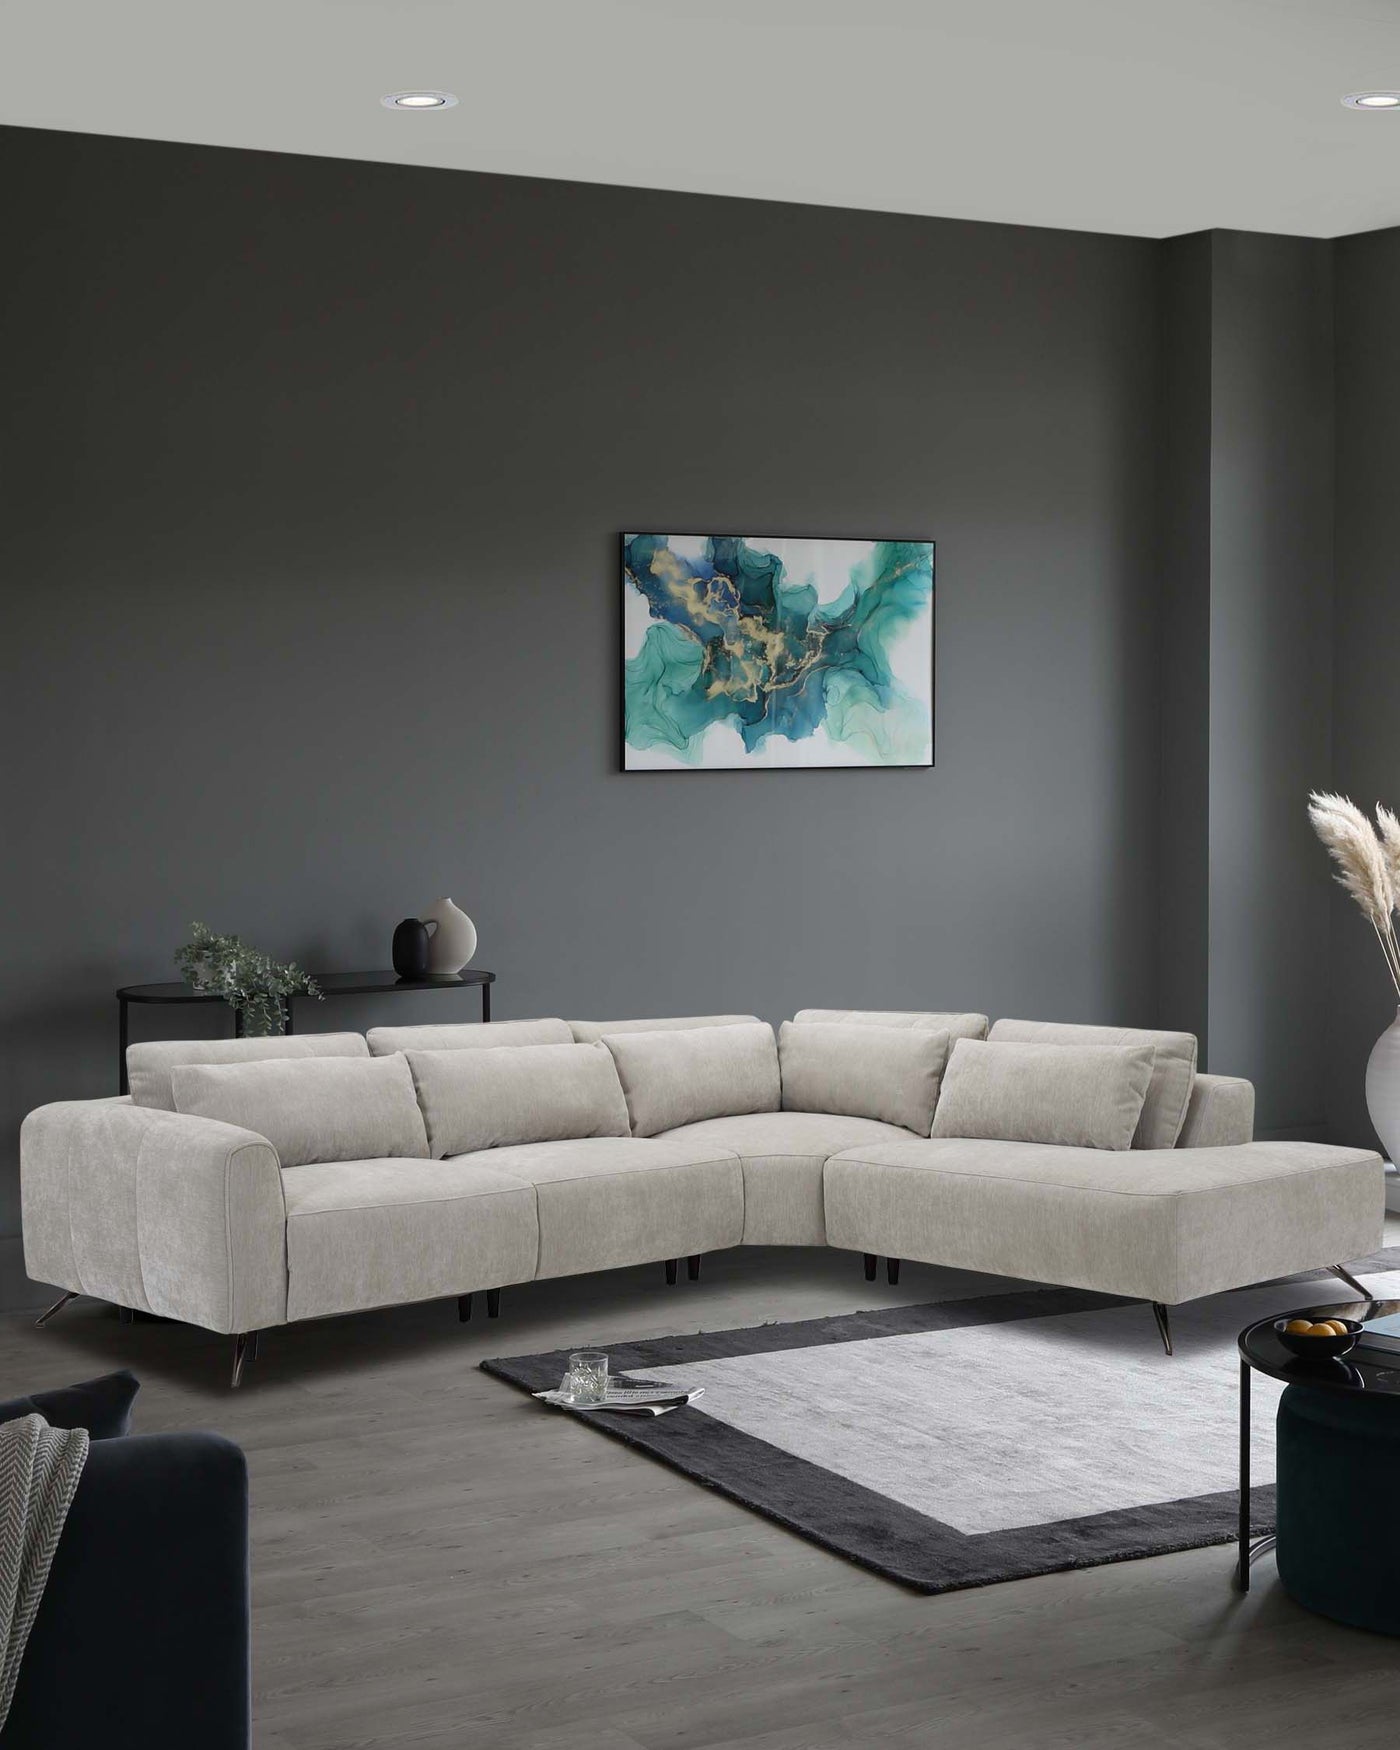 Modern light grey fabric L-shaped sectional sofa with metal legs, paired with a two-tone grey area rug in a contemporary living room setting. A sleek black round side table with a matching black vase and decorative bowl, along with a metallic finish floor lamp, complement the minimalist style.